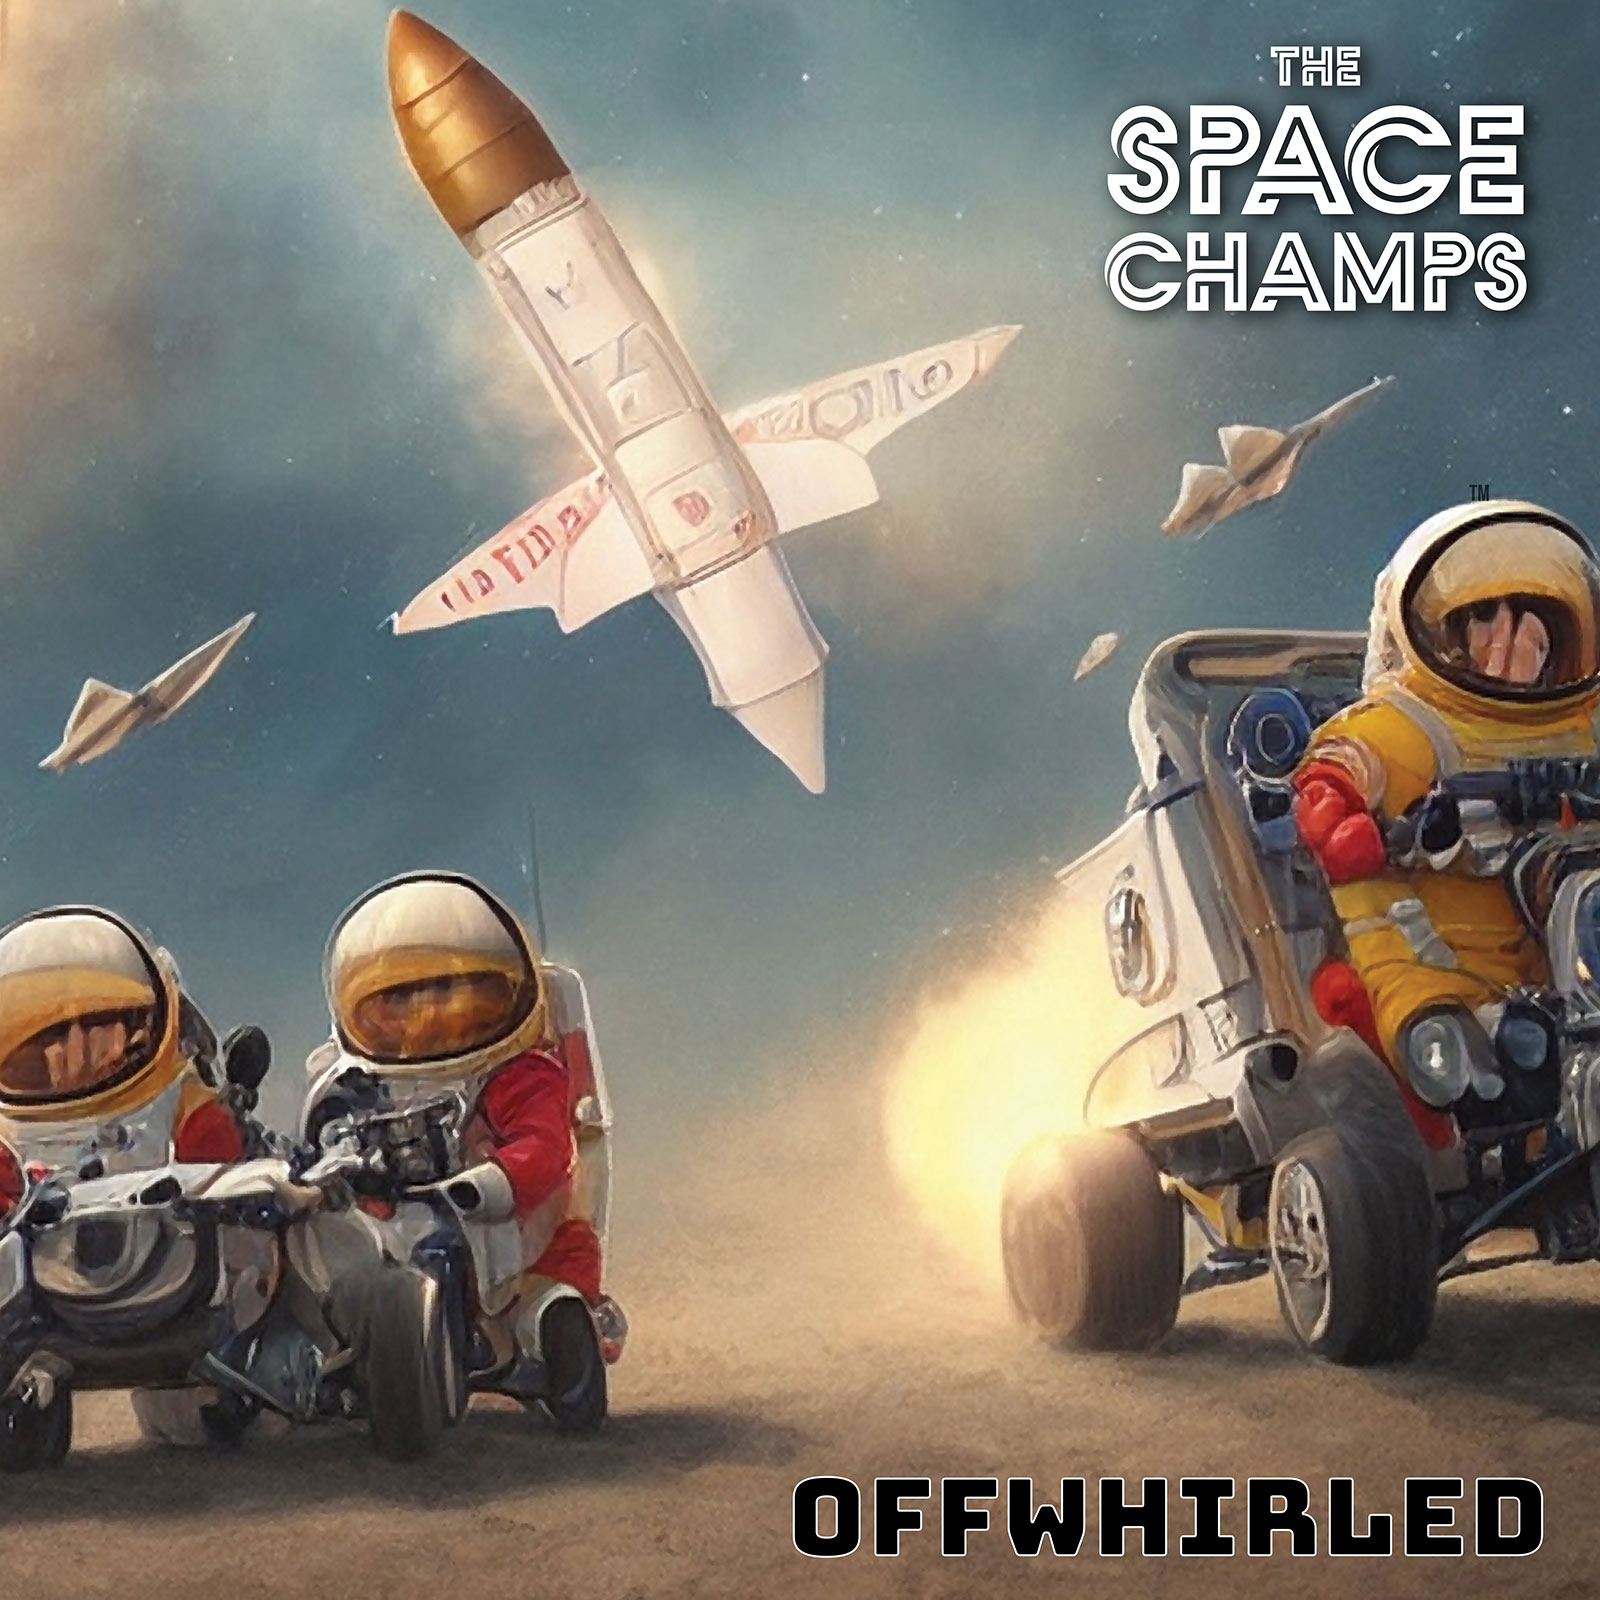 Offwhirled by The Space Champs - album cover